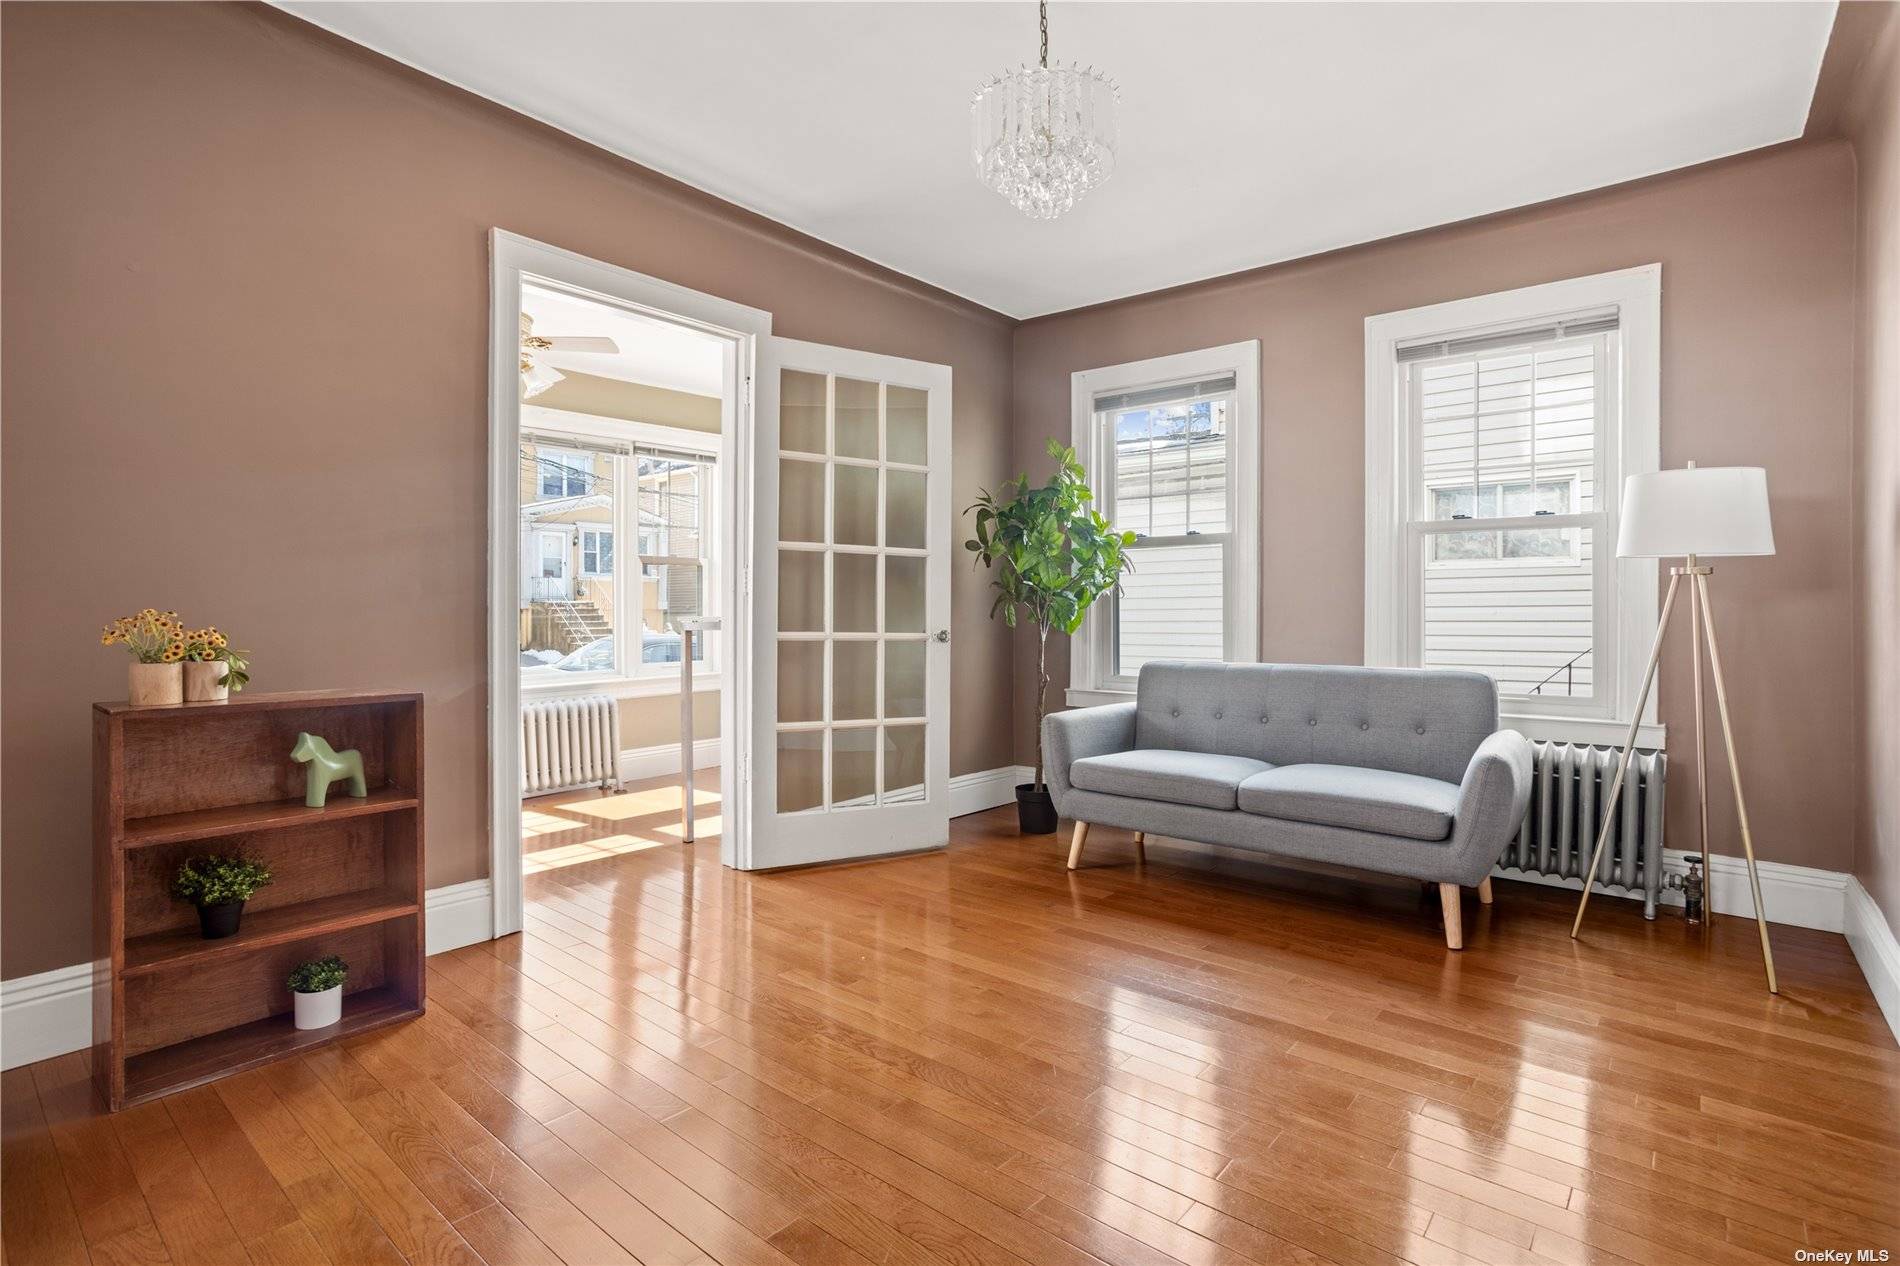 Enjoy the single family home lifestyle without leaving the city in this recently updated three bedroom, one bathroom home featuring spacious, sun drenched interiors, a huge basement, private outdoor space ...